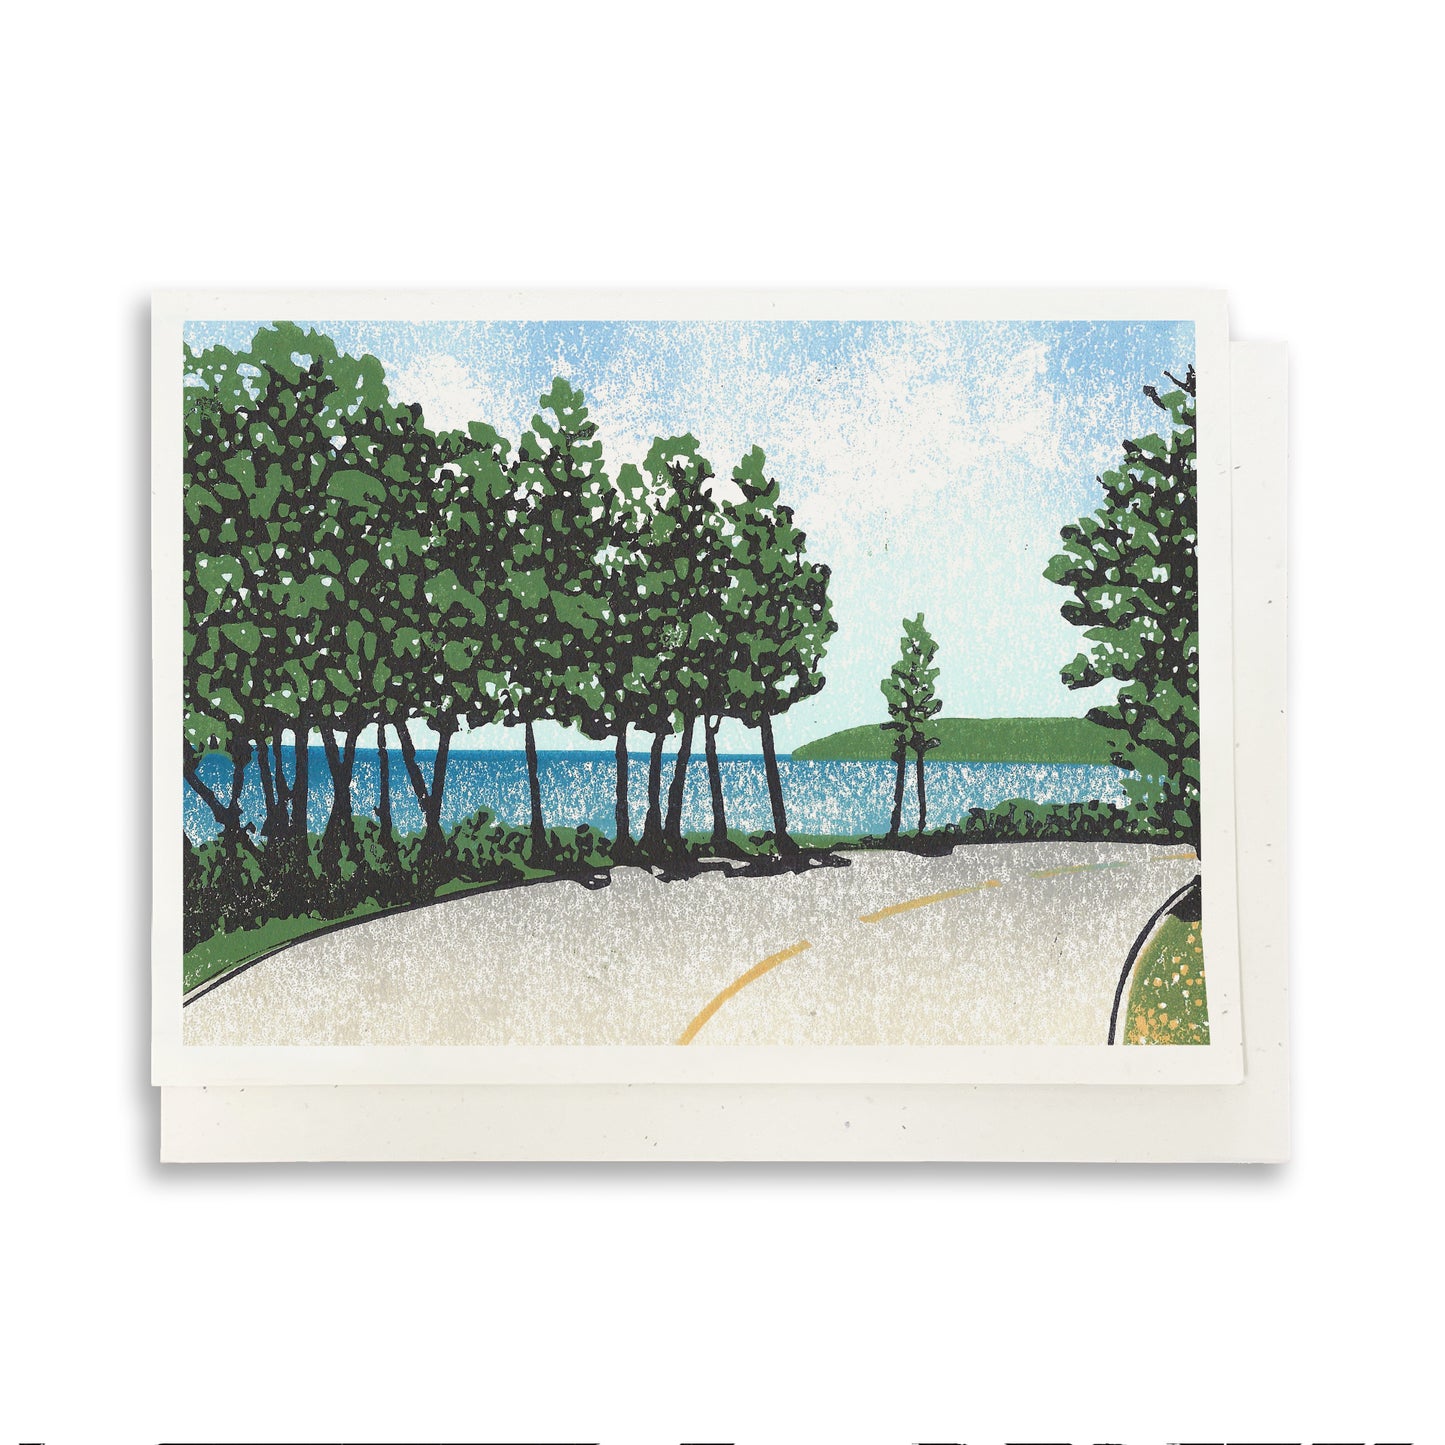 Bend by the Bay greeting card by Natalia Wohletz of Peninsula Prints.